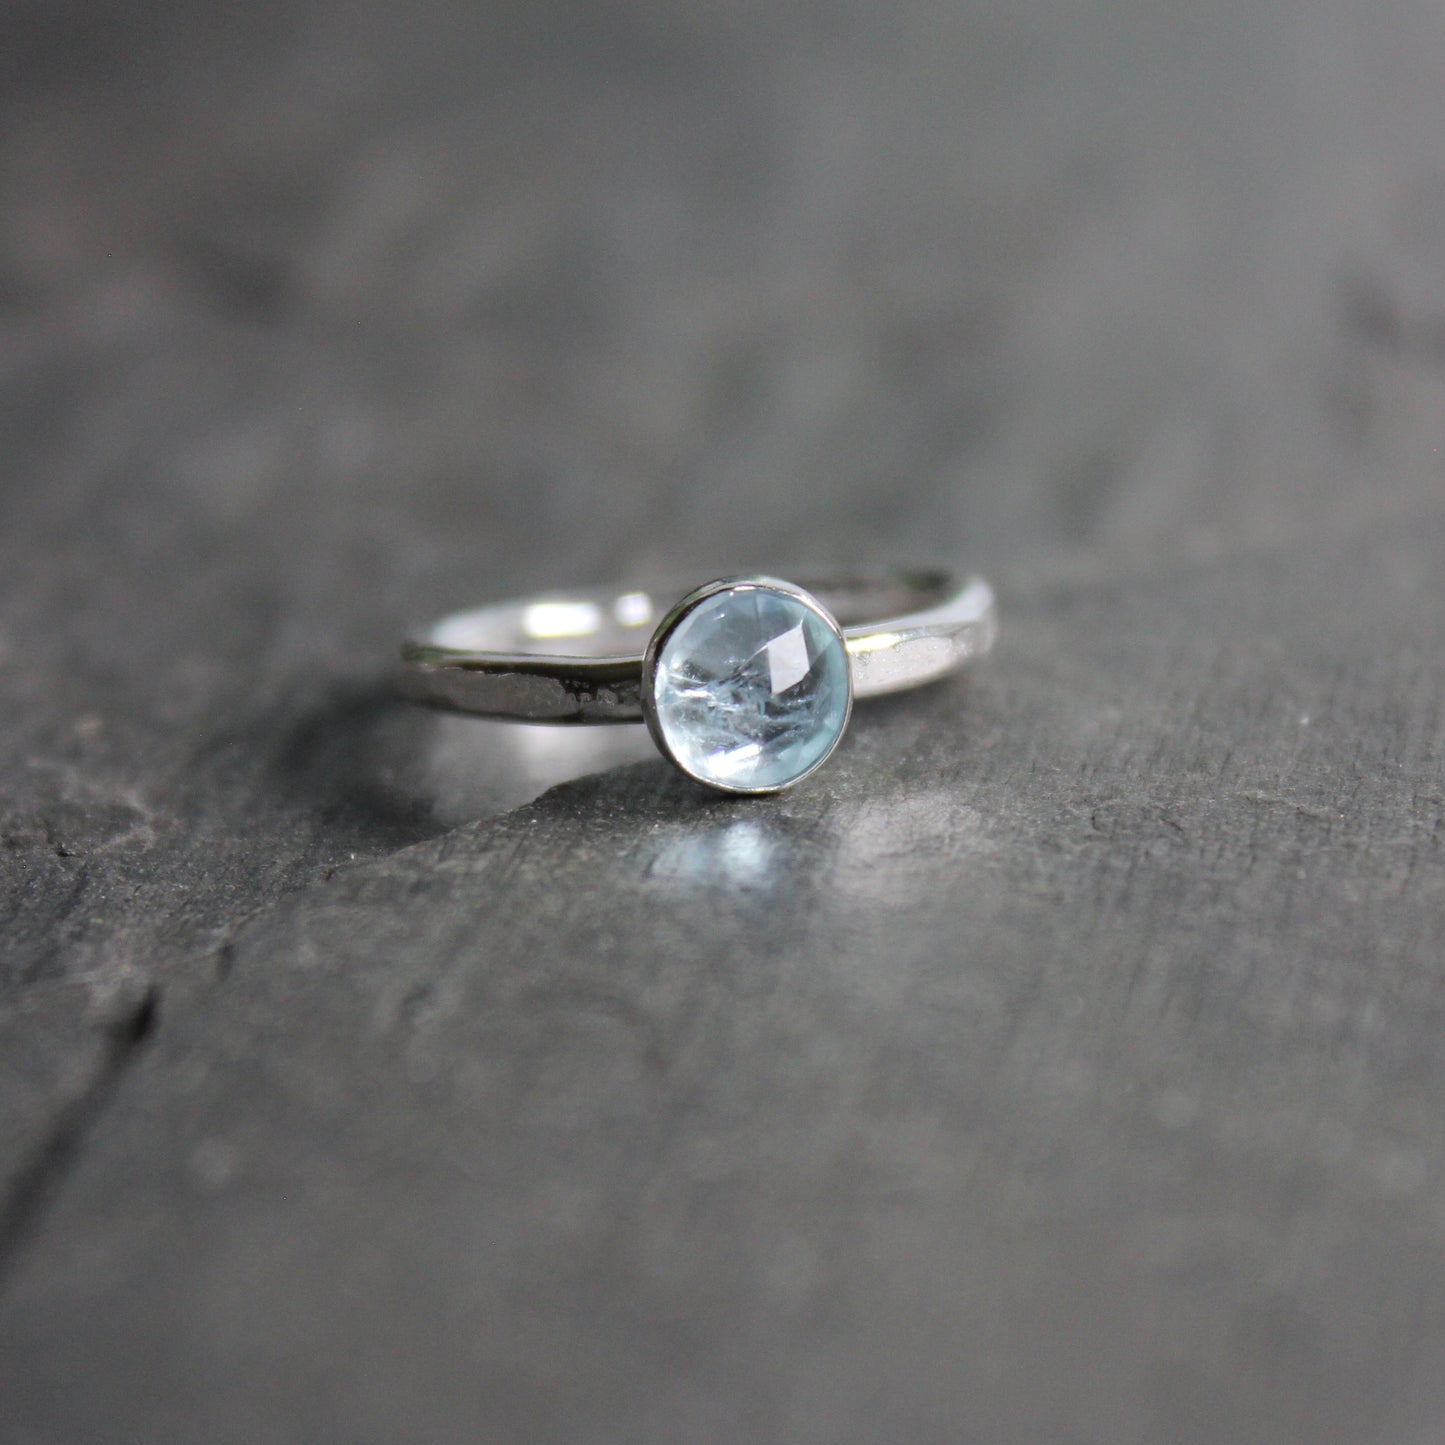 6mm rose cut aquamarine in a sterling silver bezel setting on a sturdy silver band. 